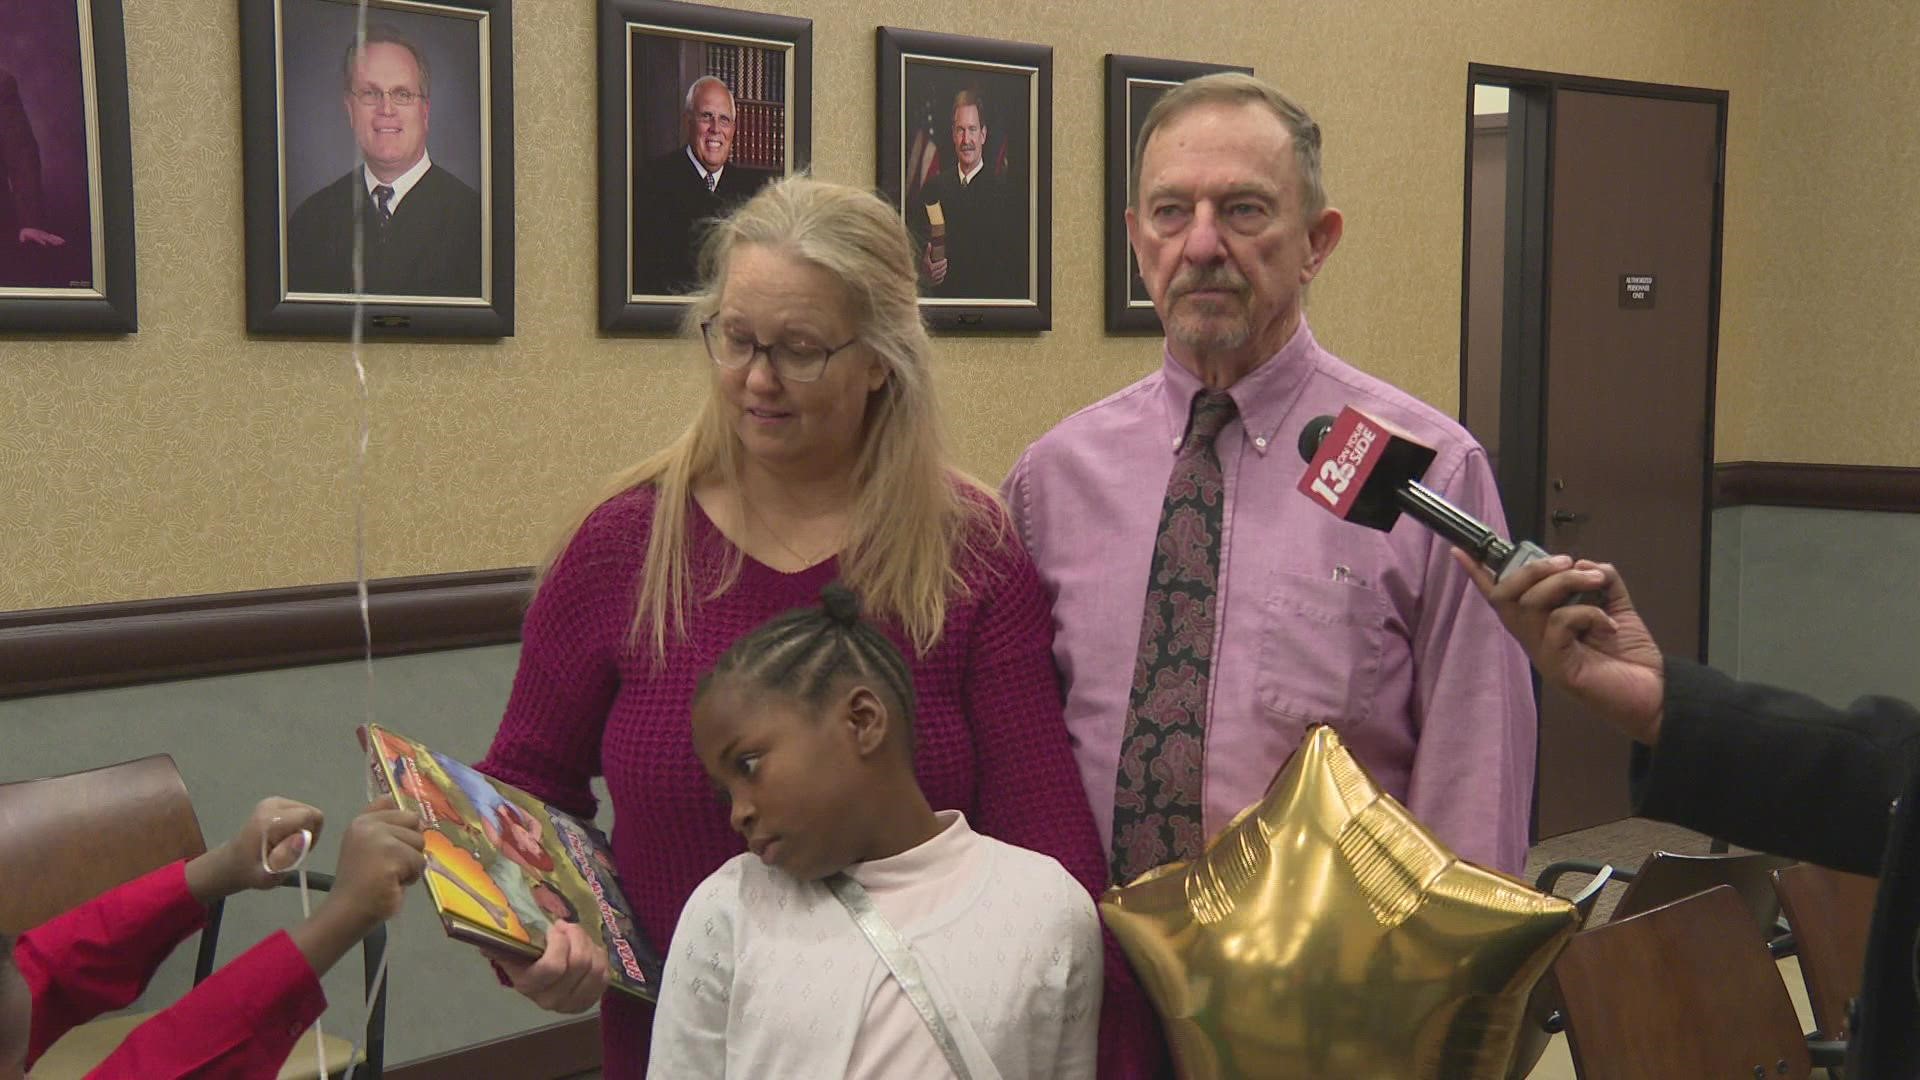 The Jamieson Family from Fremont adopted two children from the Ottawa County Court System.